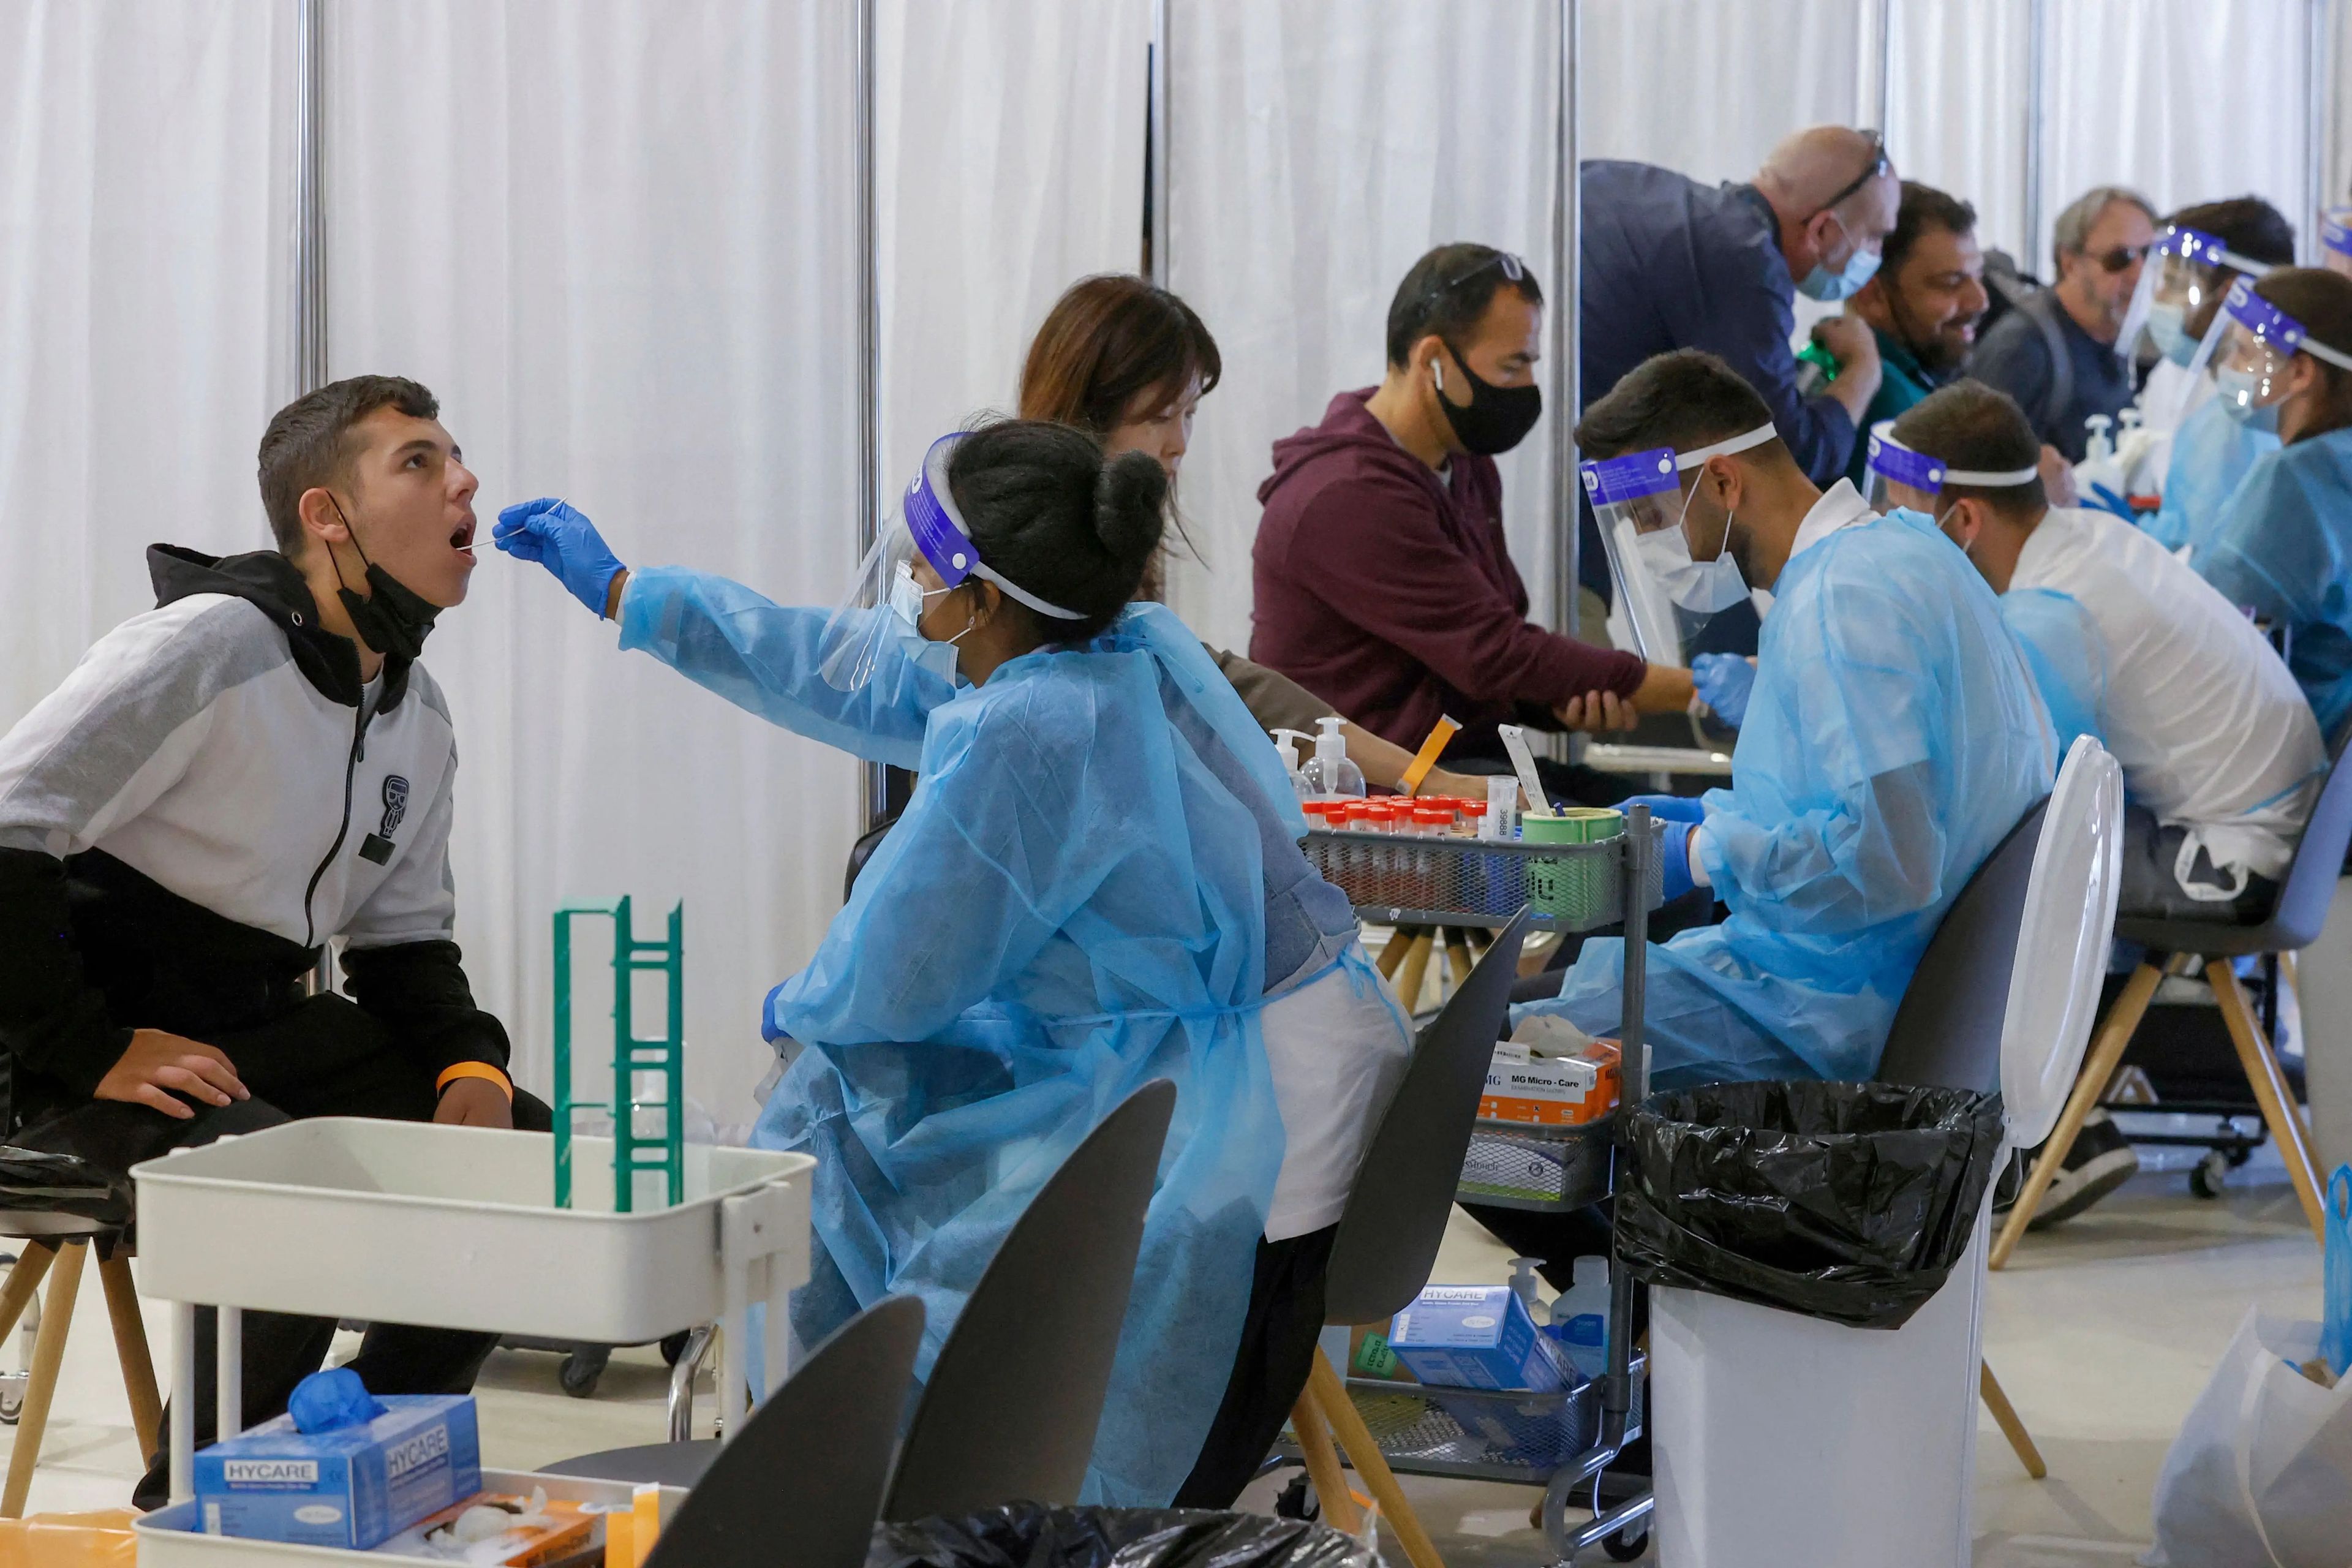 Israelis and vaccinated tourists get tested for COVID-19 upon arrival to Israel's Ben Gurion airport on May 23, 2021.